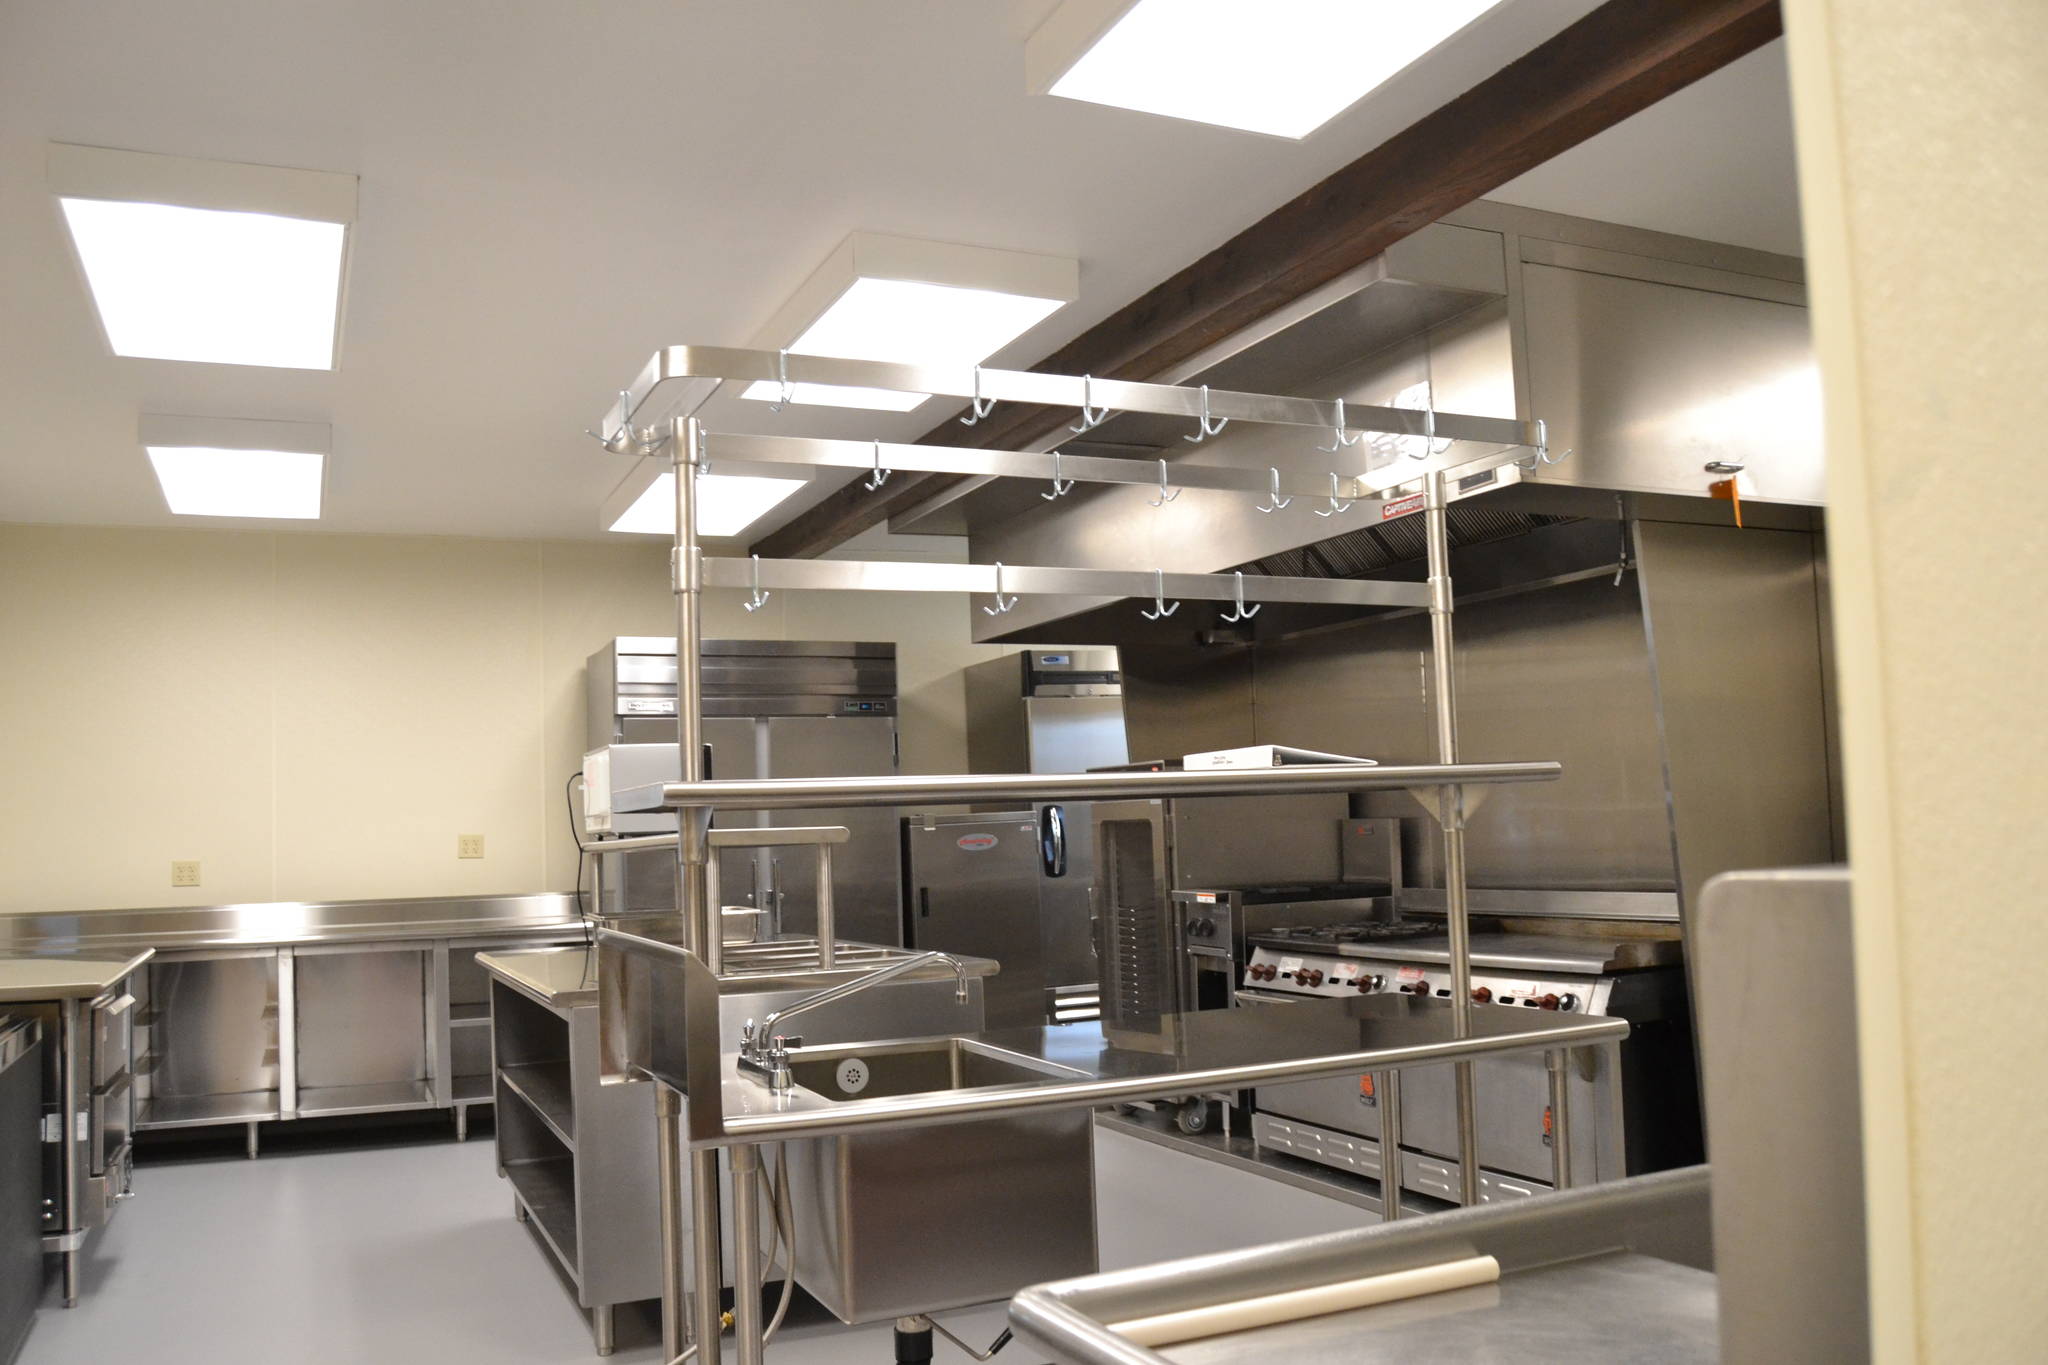 Work to refurbish the Guy Cole Events Center’s kitchen included installing a new oven hood and fire suppression system, a freezer, ice machine, lighting, and flooring along with providing electrical and plumbing hookups for future items. Sequim Gazette photo by Matthew Nash